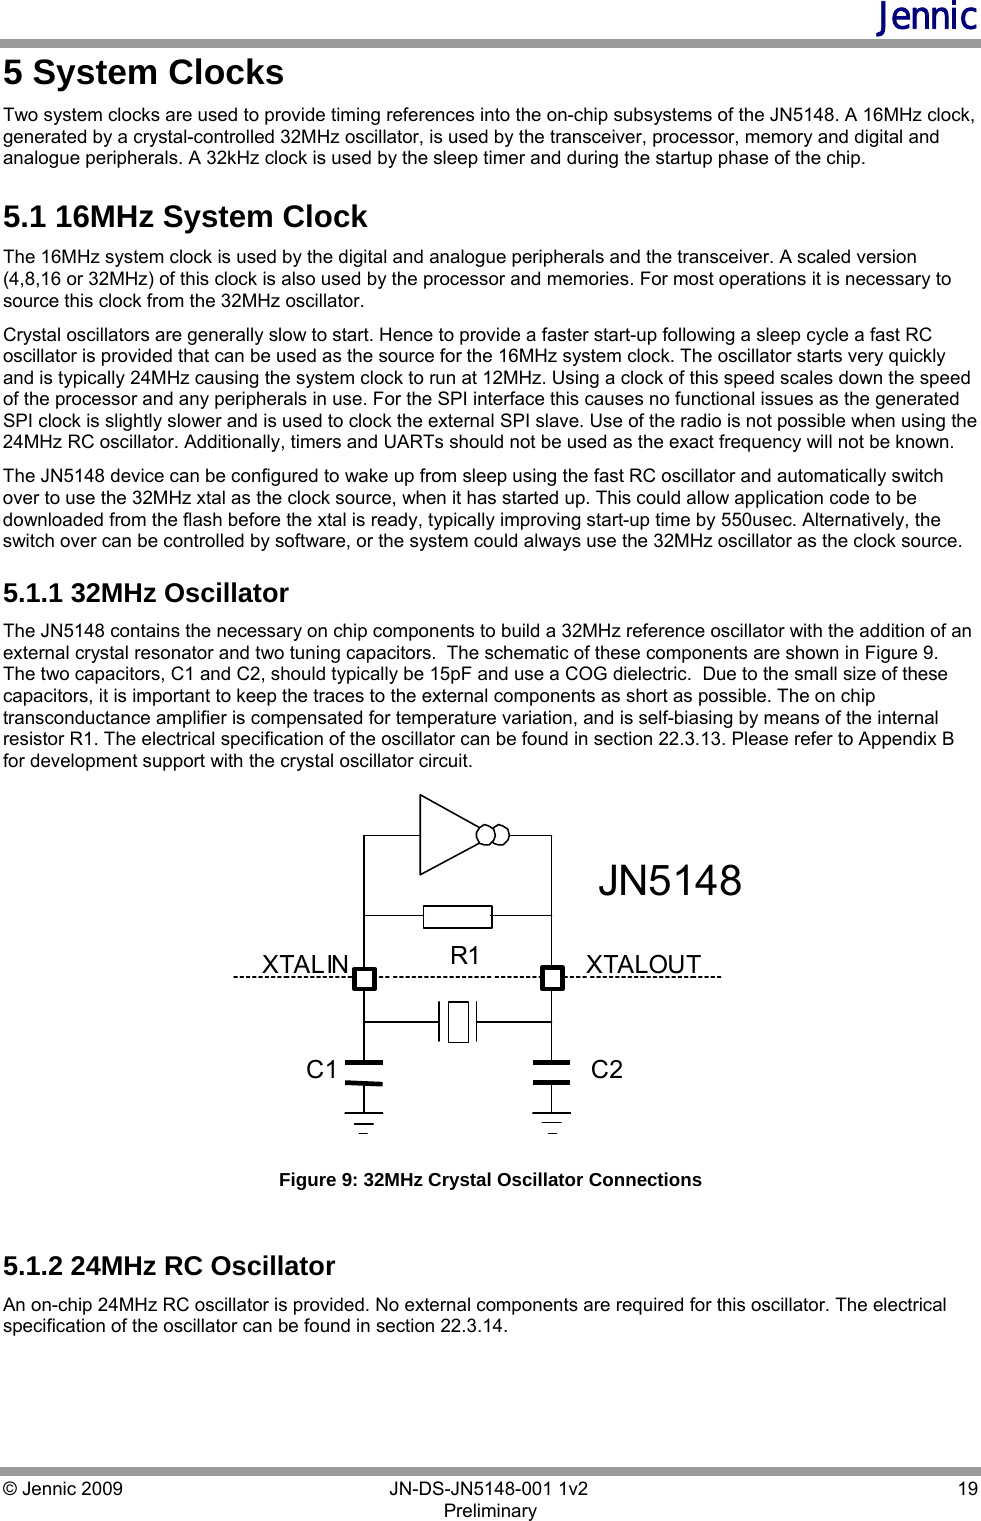 Jennic © Jennic 2009        JN-DS-JN5148-001 1v2  19 Preliminary  5 System Clocks Two system clocks are used to provide timing references into the on-chip subsystems of the JN5148. A 16MHz clock, generated by a crystal-controlled 32MHz oscillator, is used by the transceiver, processor, memory and digital and analogue peripherals. A 32kHz clock is used by the sleep timer and during the startup phase of the chip. 5.1 16MHz System Clock The 16MHz system clock is used by the digital and analogue peripherals and the transceiver. A scaled version (4,8,16 or 32MHz) of this clock is also used by the processor and memories. For most operations it is necessary to source this clock from the 32MHz oscillator. Crystal oscillators are generally slow to start. Hence to provide a faster start-up following a sleep cycle a fast RC oscillator is provided that can be used as the source for the 16MHz system clock. The oscillator starts very quickly and is typically 24MHz causing the system clock to run at 12MHz. Using a clock of this speed scales down the speed of the processor and any peripherals in use. For the SPI interface this causes no functional issues as the generated SPI clock is slightly slower and is used to clock the external SPI slave. Use of the radio is not possible when using the 24MHz RC oscillator. Additionally, timers and UARTs should not be used as the exact frequency will not be known. The JN5148 device can be configured to wake up from sleep using the fast RC oscillator and automatically switch over to use the 32MHz xtal as the clock source, when it has started up. This could allow application code to be downloaded from the flash before the xtal is ready, typically improving start-up time by 550usec. Alternatively, the switch over can be controlled by software, or the system could always use the 32MHz oscillator as the clock source. 5.1.1 32MHz Oscillator The JN5148 contains the necessary on chip components to build a 32MHz reference oscillator with the addition of an external crystal resonator and two tuning capacitors.  The schematic of these components are shown in Figure 9.  The two capacitors, C1 and C2, should typically be 15pF and use a COG dielectric.  Due to the small size of these capacitors, it is important to keep the traces to the external components as short as possible. The on chip transconductance amplifier is compensated for temperature variation, and is self-biasing by means of the internal resistor R1. The electrical specification of the oscillator can be found in section 22.3.13. Please refer to Appendix B for development support with the crystal oscillator circuit. XTALOUT C2 C1 R1 XTALIN JN5148  Figure 9: 32MHz Crystal Oscillator Connections   5.1.2 24MHz RC Oscillator An on-chip 24MHz RC oscillator is provided. No external components are required for this oscillator. The electrical specification of the oscillator can be found in section 22.3.14. 